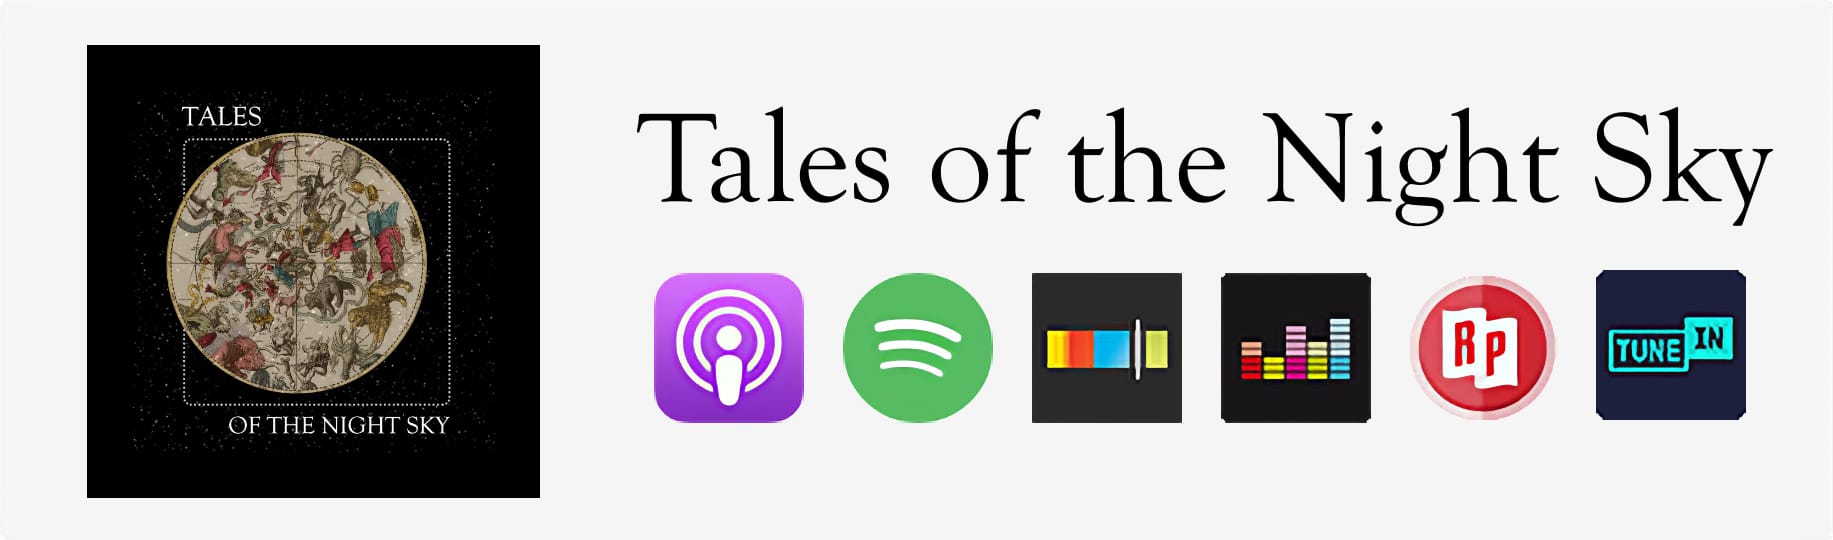 Tales of the Night Sky Podcast